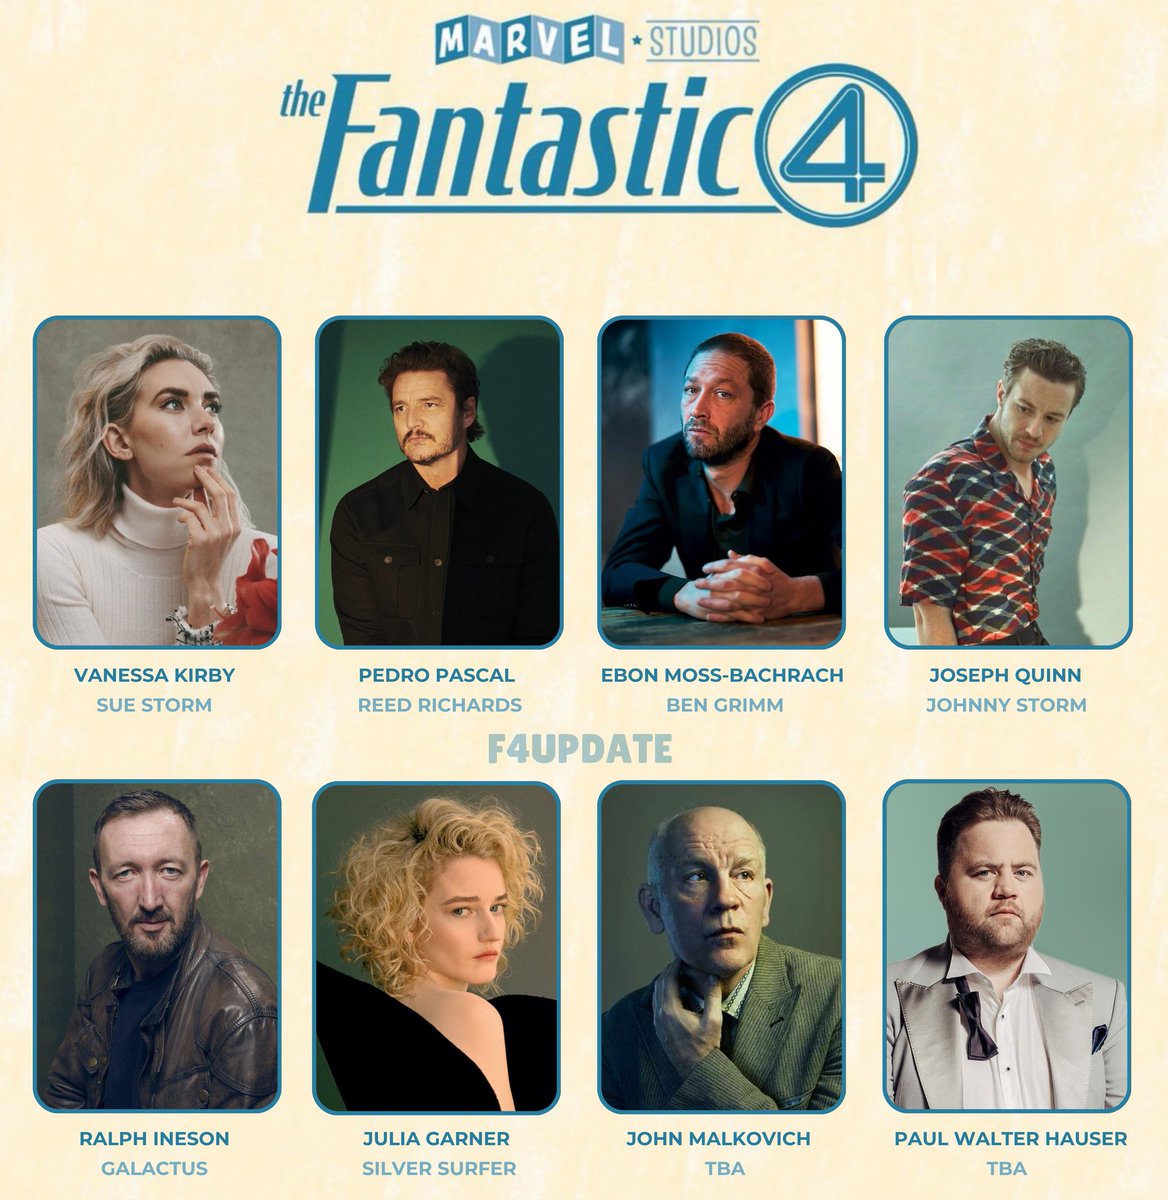 The cast of Marvel Studiosʼ ‘THE FANTASTIC FOUR’